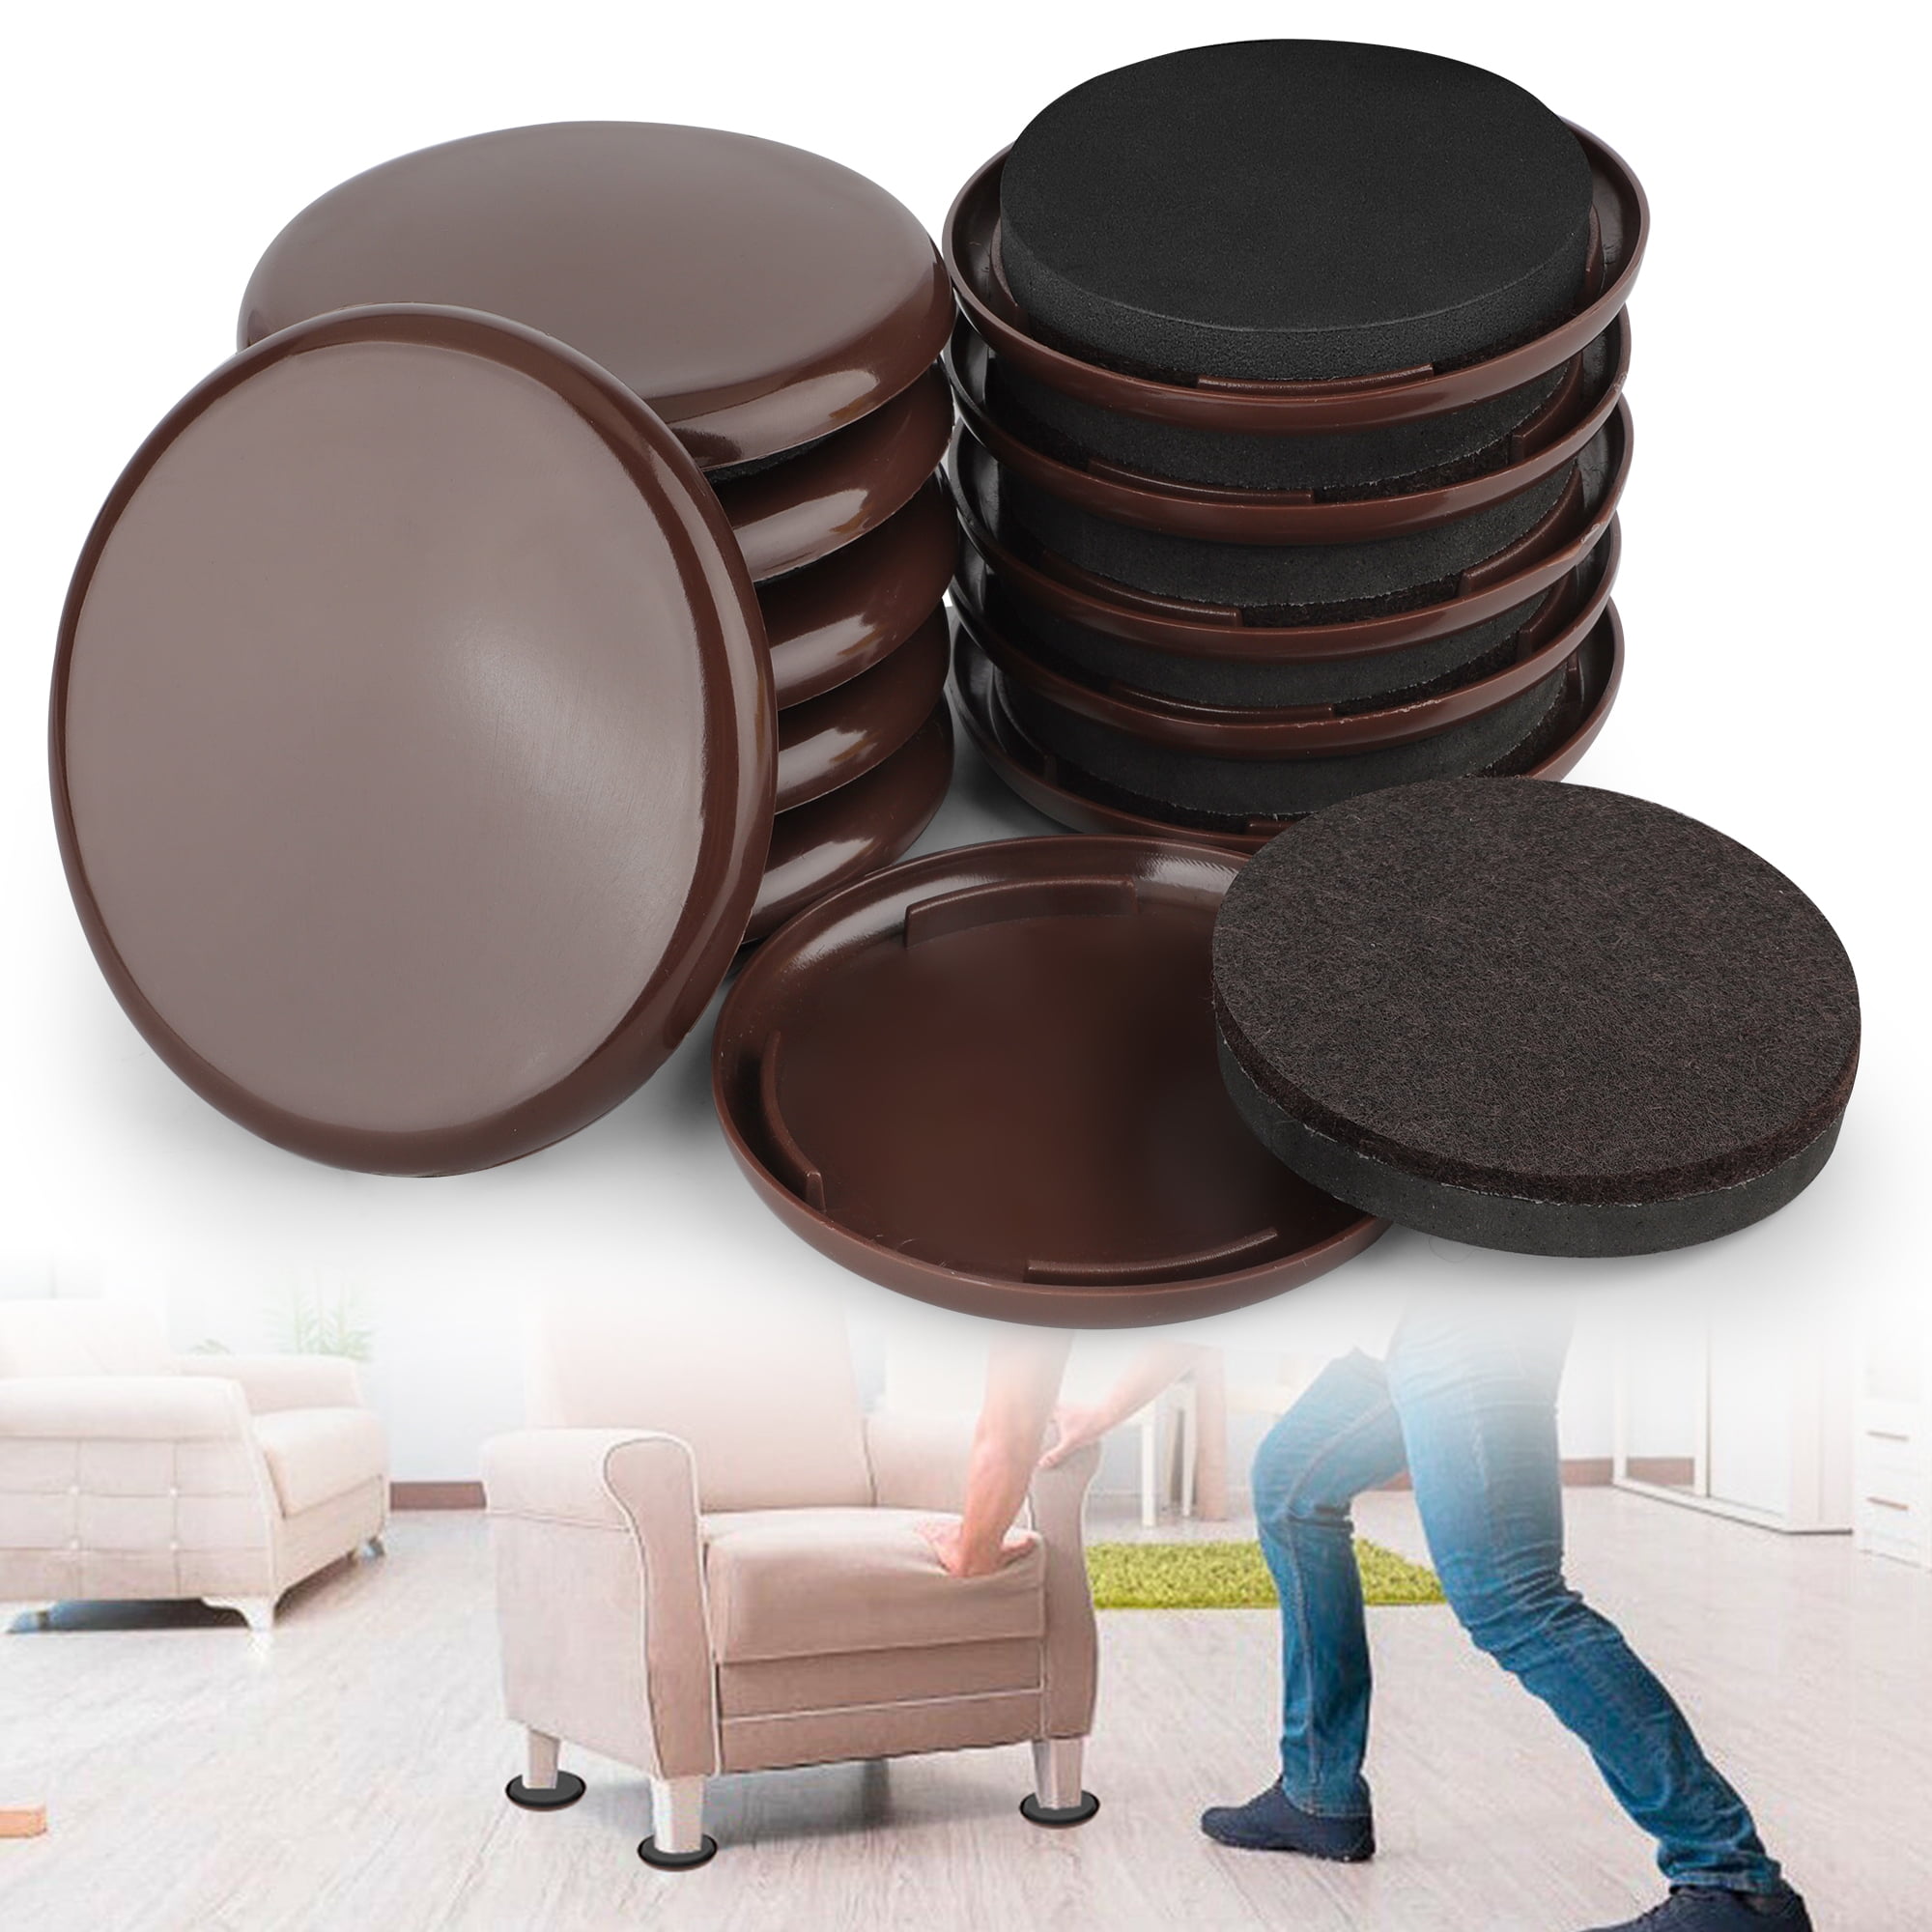 Round Furniture Moving Kit (16 Piece) for Carpeted and Hard Floor Surfaces  Felt Pads Suitable for All The Furniture Sliders